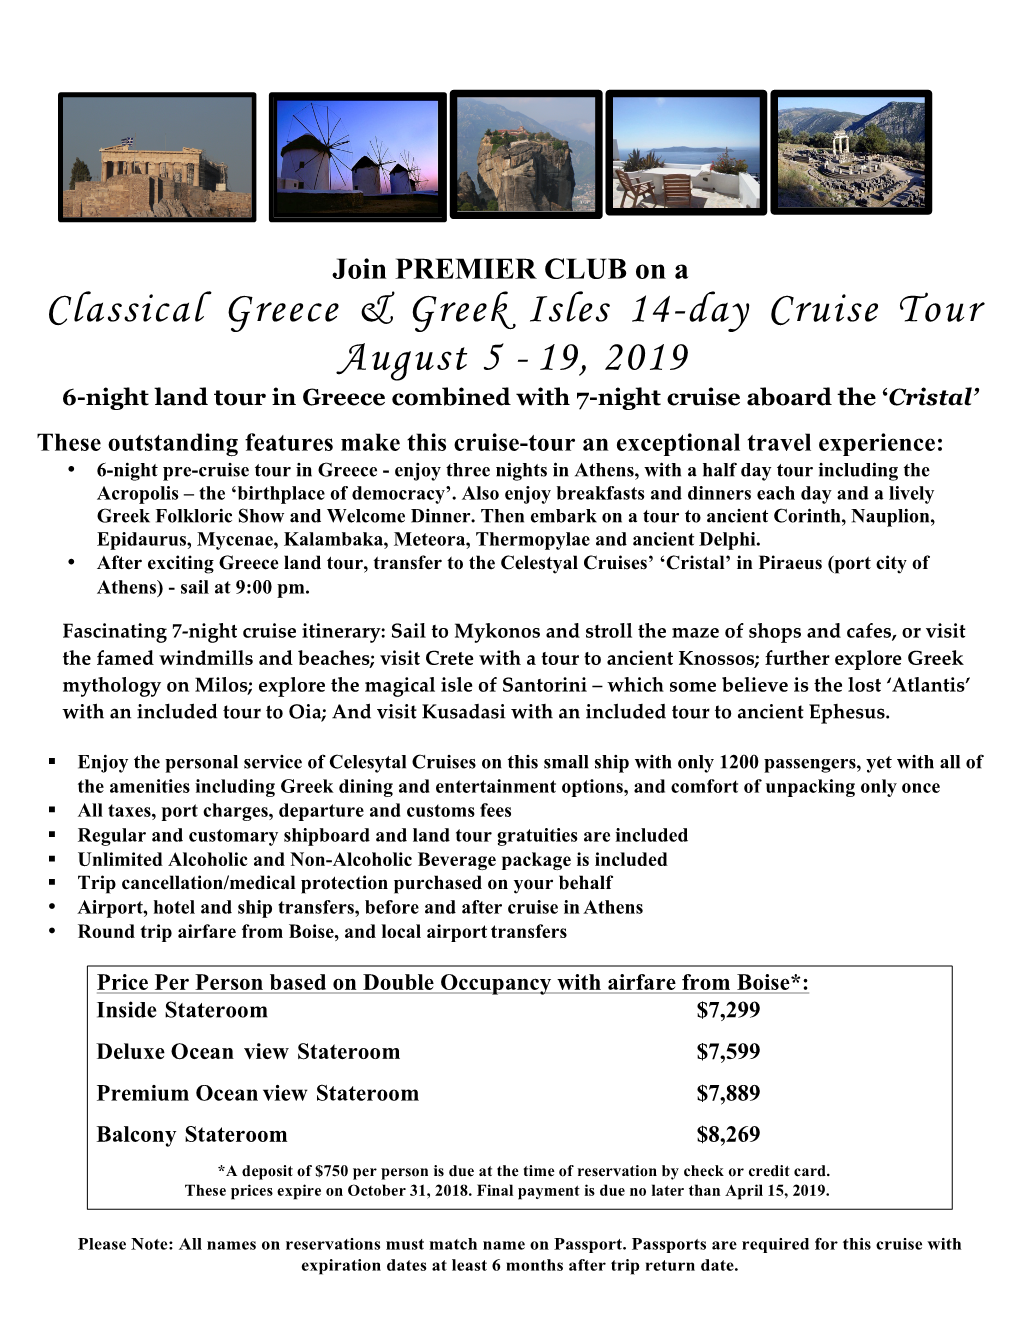 Classical Greece & Greek Isles 14-Day Cruise Tour August 5